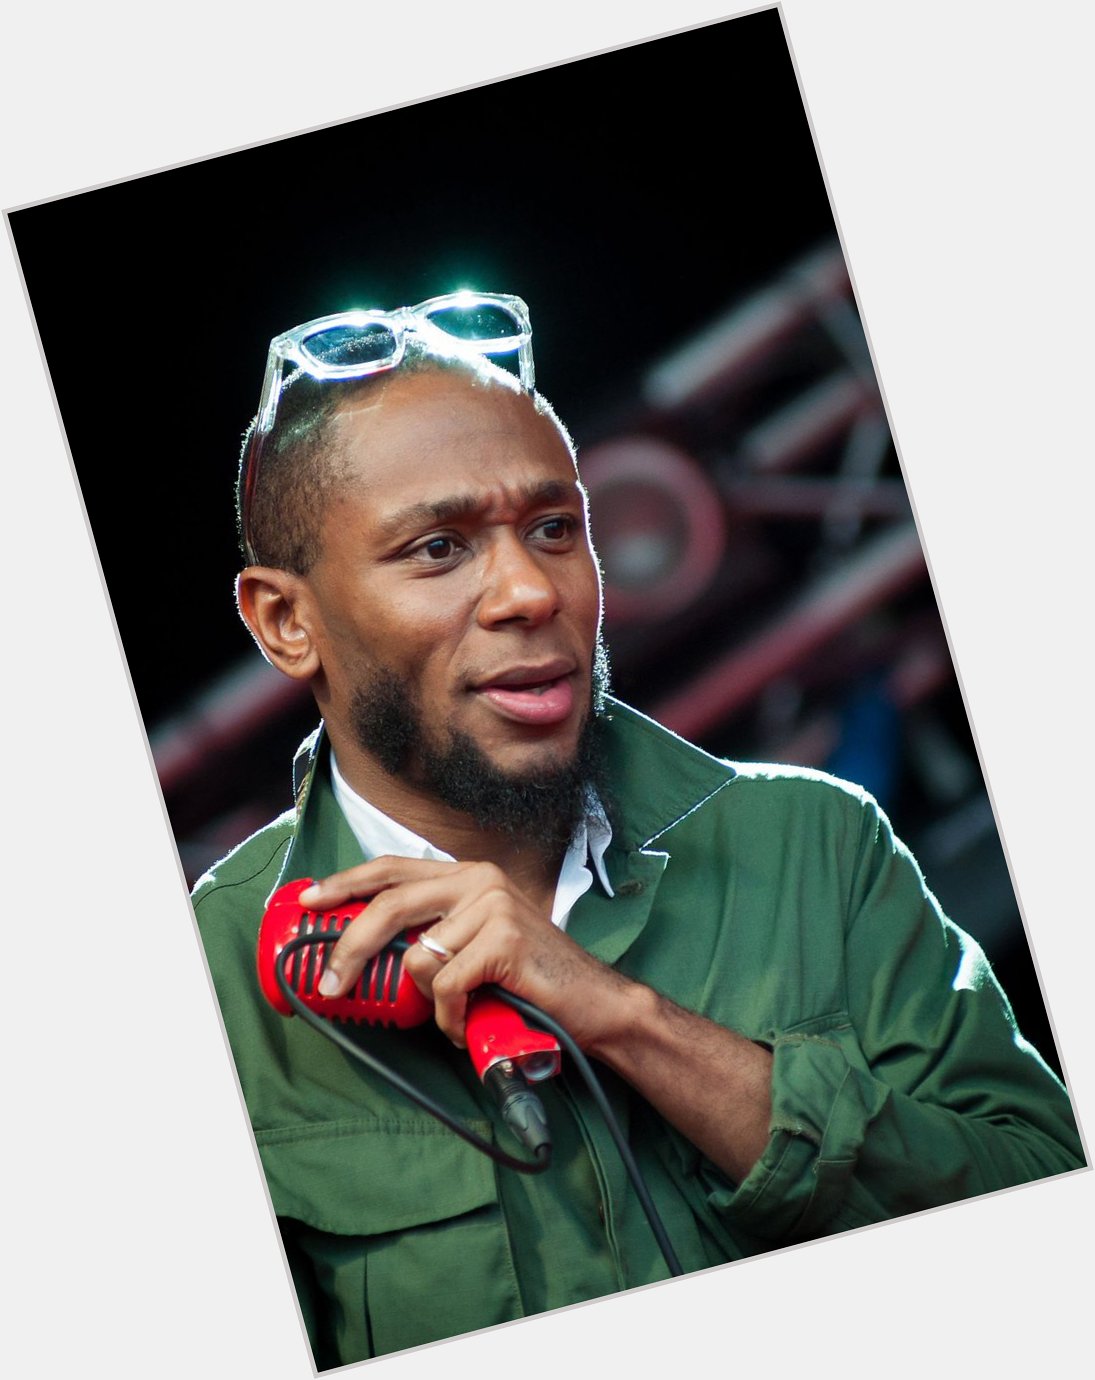 Happy Birthday to Mos Def who turns 44 today! 